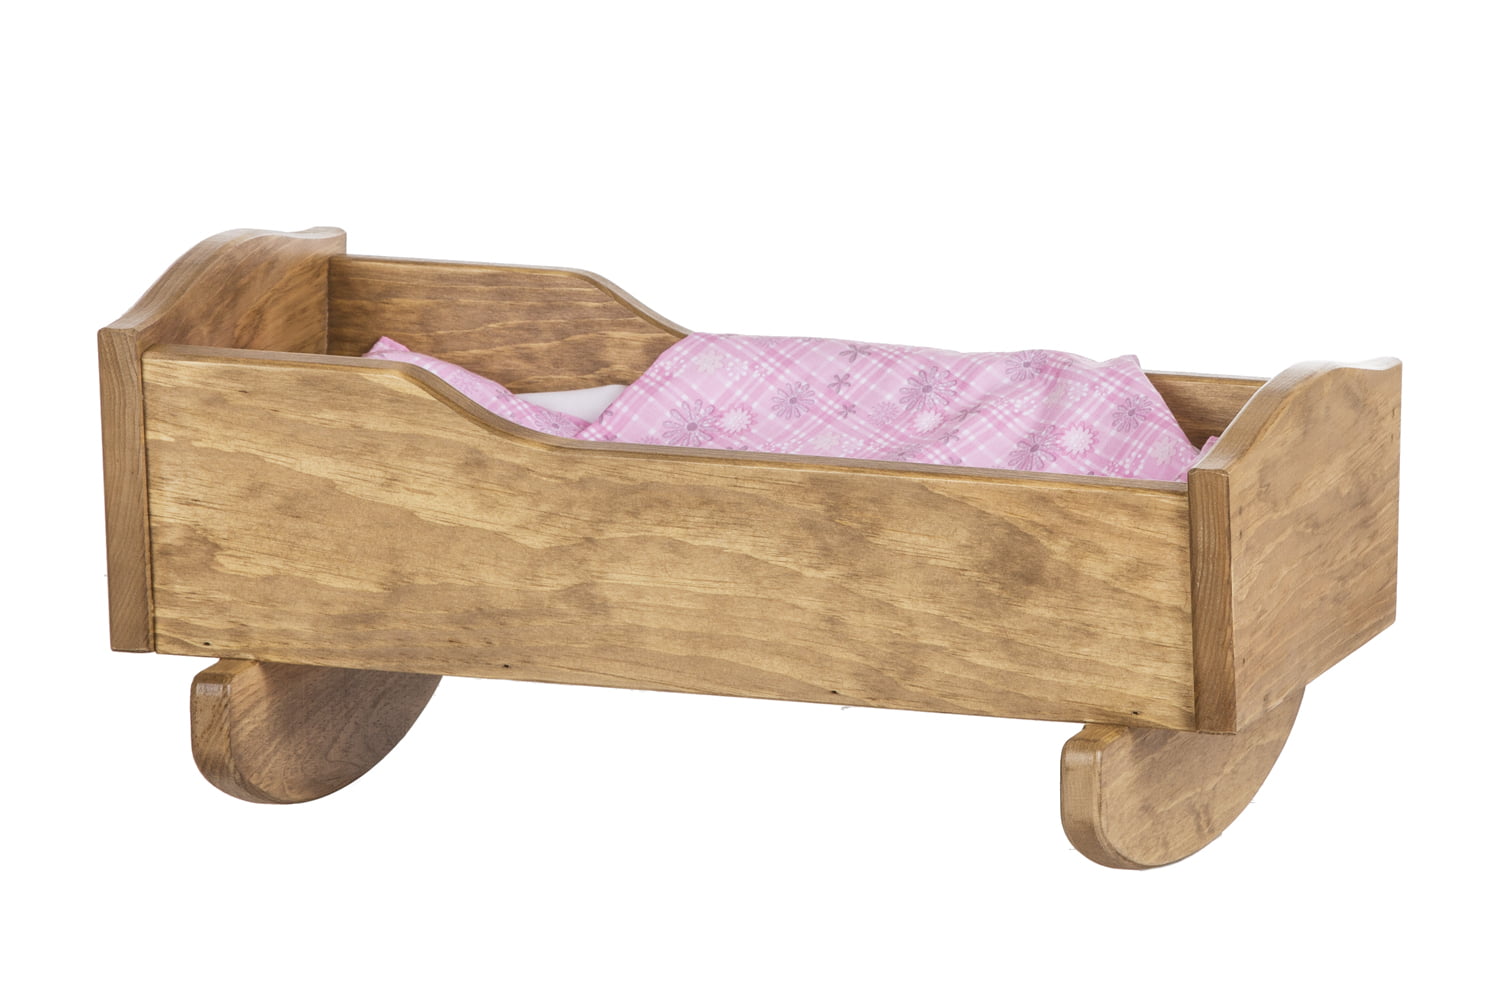 Toy Doll Cradle fits 12 inch to 18 inch Dolls